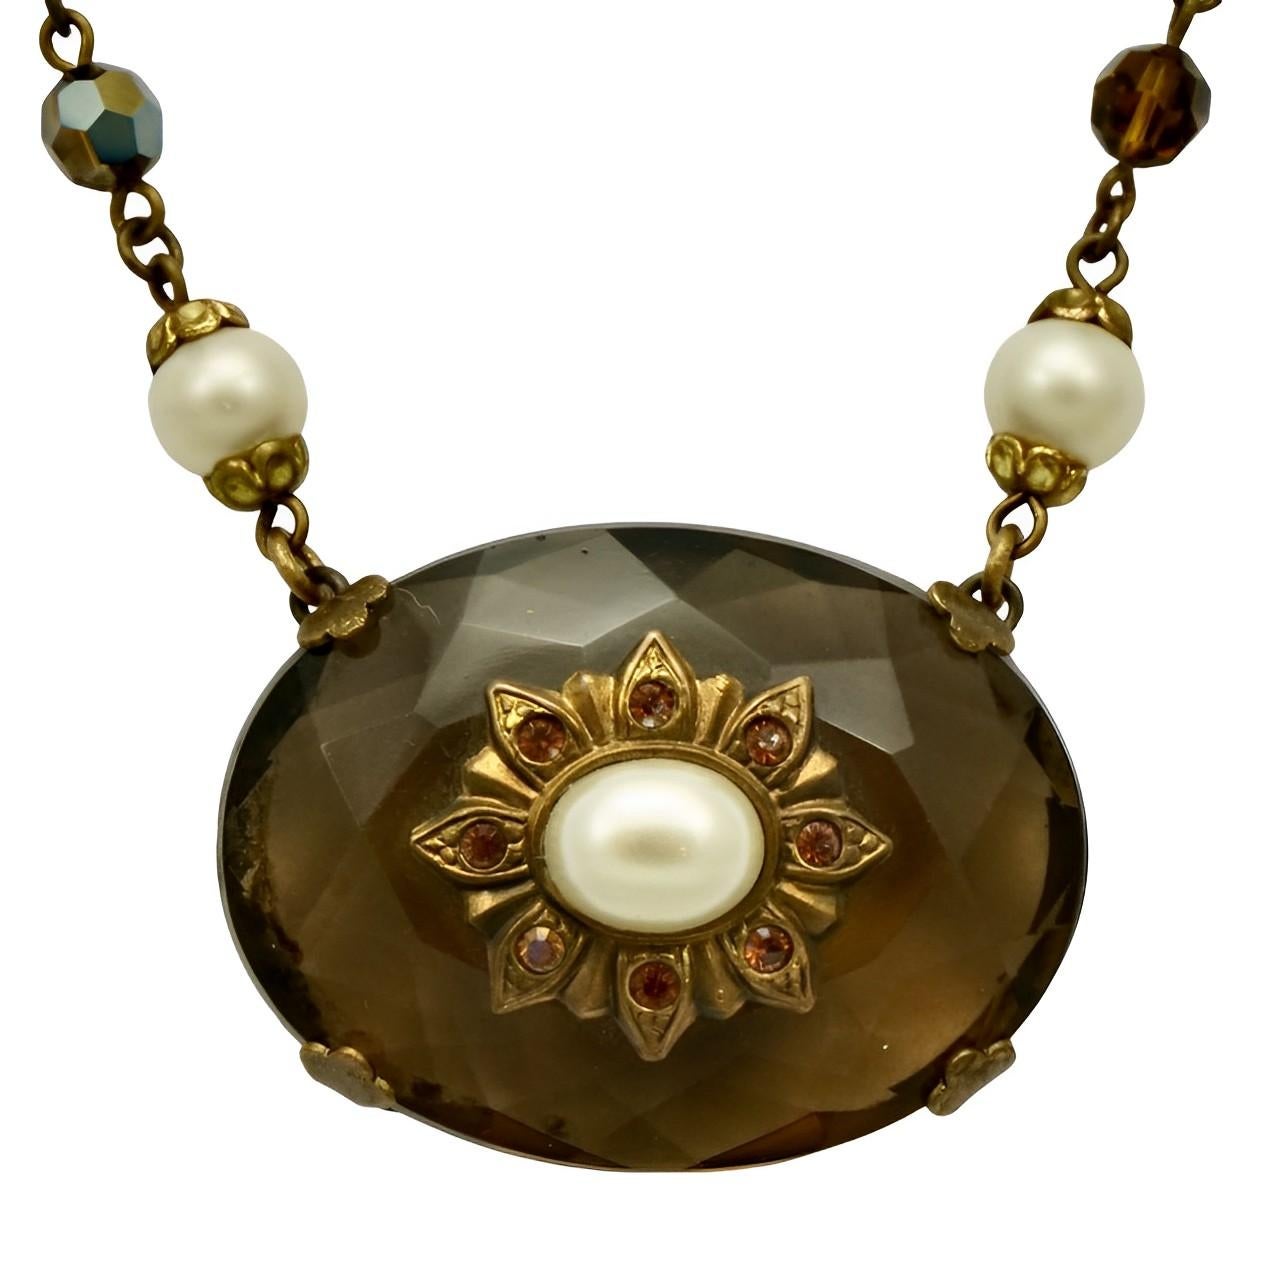 Fabulous gold plated necklace with aurora borealis and faux pearl beads, and featuring a large glass centrepiece with faux pearl and citrine rhinestones detail. Measuring length 52.5 cm / 20.6 inches including the extension. The centrepiece is